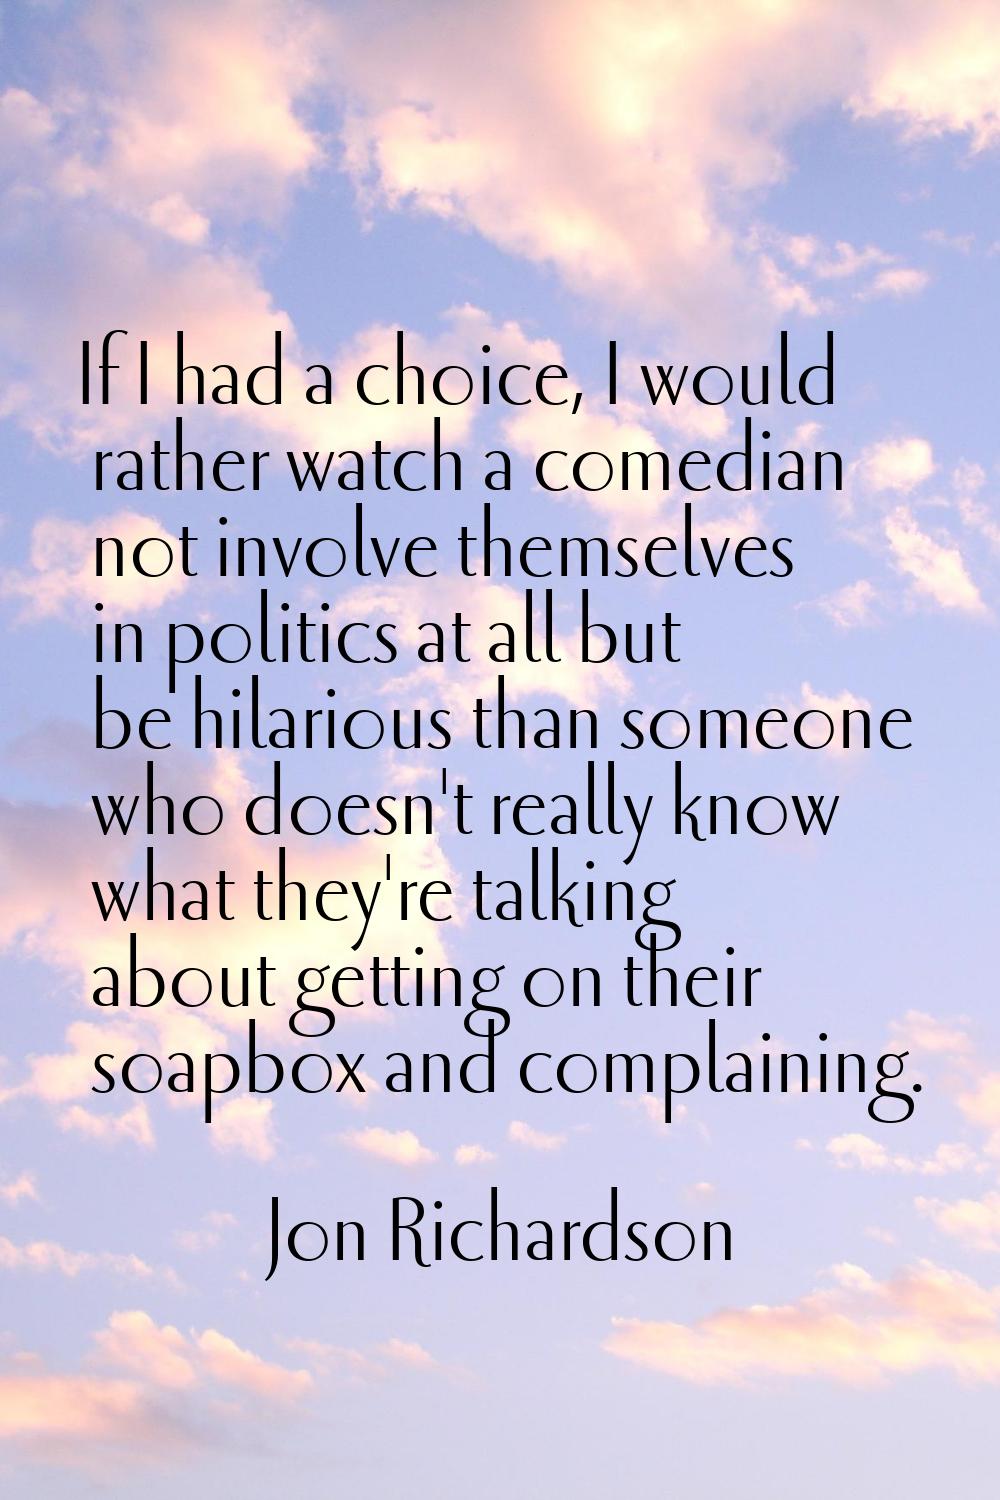 If I had a choice, I would rather watch a comedian not involve themselves in politics at all but be